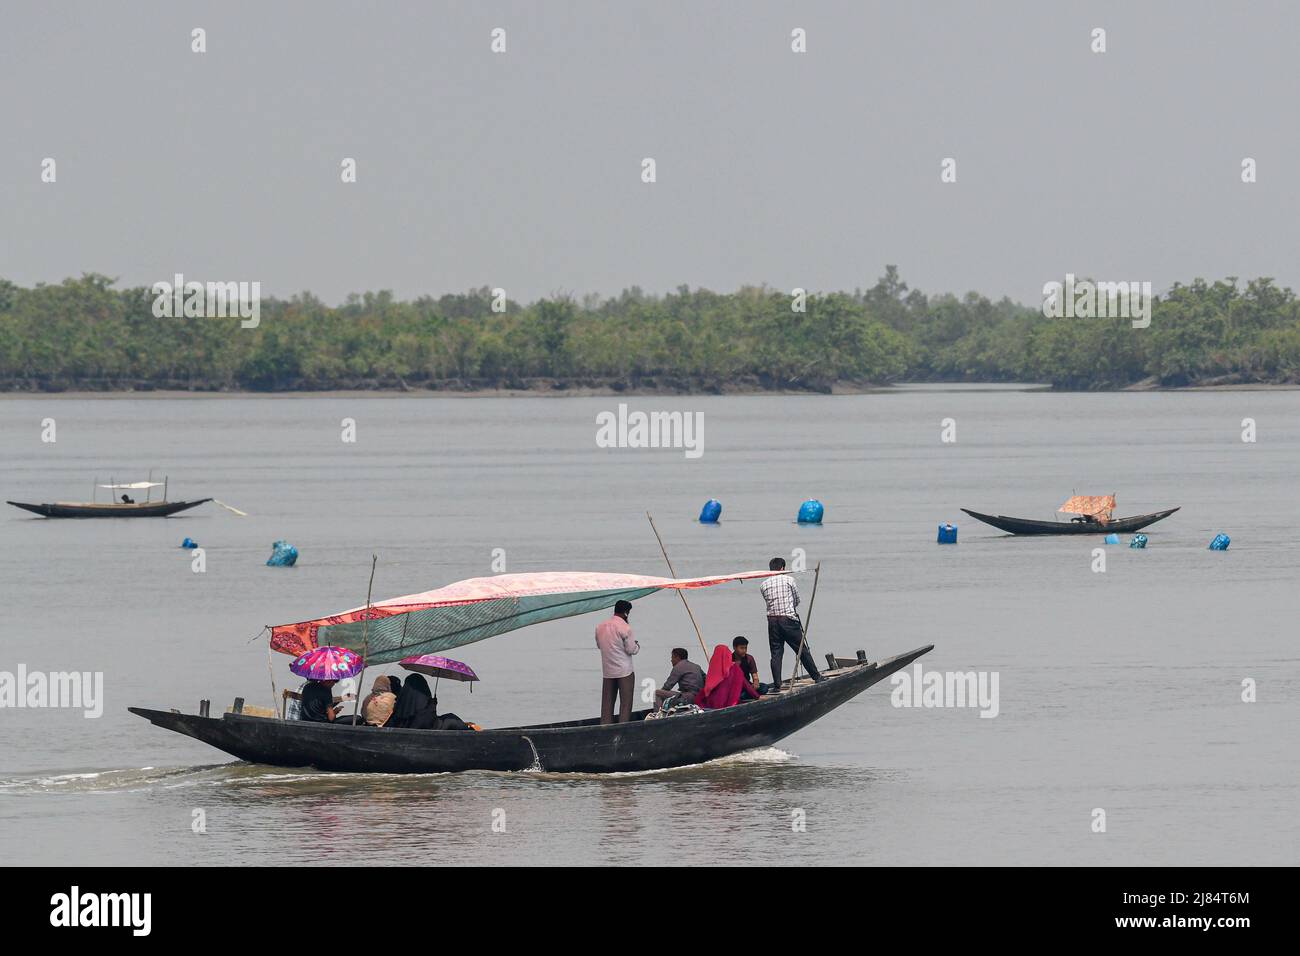 People seen crossing the Kholpatua river by a boat near the Sundarban forest at Shyamnagar in the Satkhira district. Thousands of men and women go into the Sundarbans forest in Southern Bangladesh every day to gather honey, collect firewood, or catch fish, crabs and putting themselves at great risk for a tiger attack. Bangladesh is one of the countries most vulnerable to the effects of climate change. The regular and severe natural hazards that Bangladesh already suffers from tropical cyclones, river erosion, flood, landslides, and drought are all set to increase in intensity and frequency as Stock Photo